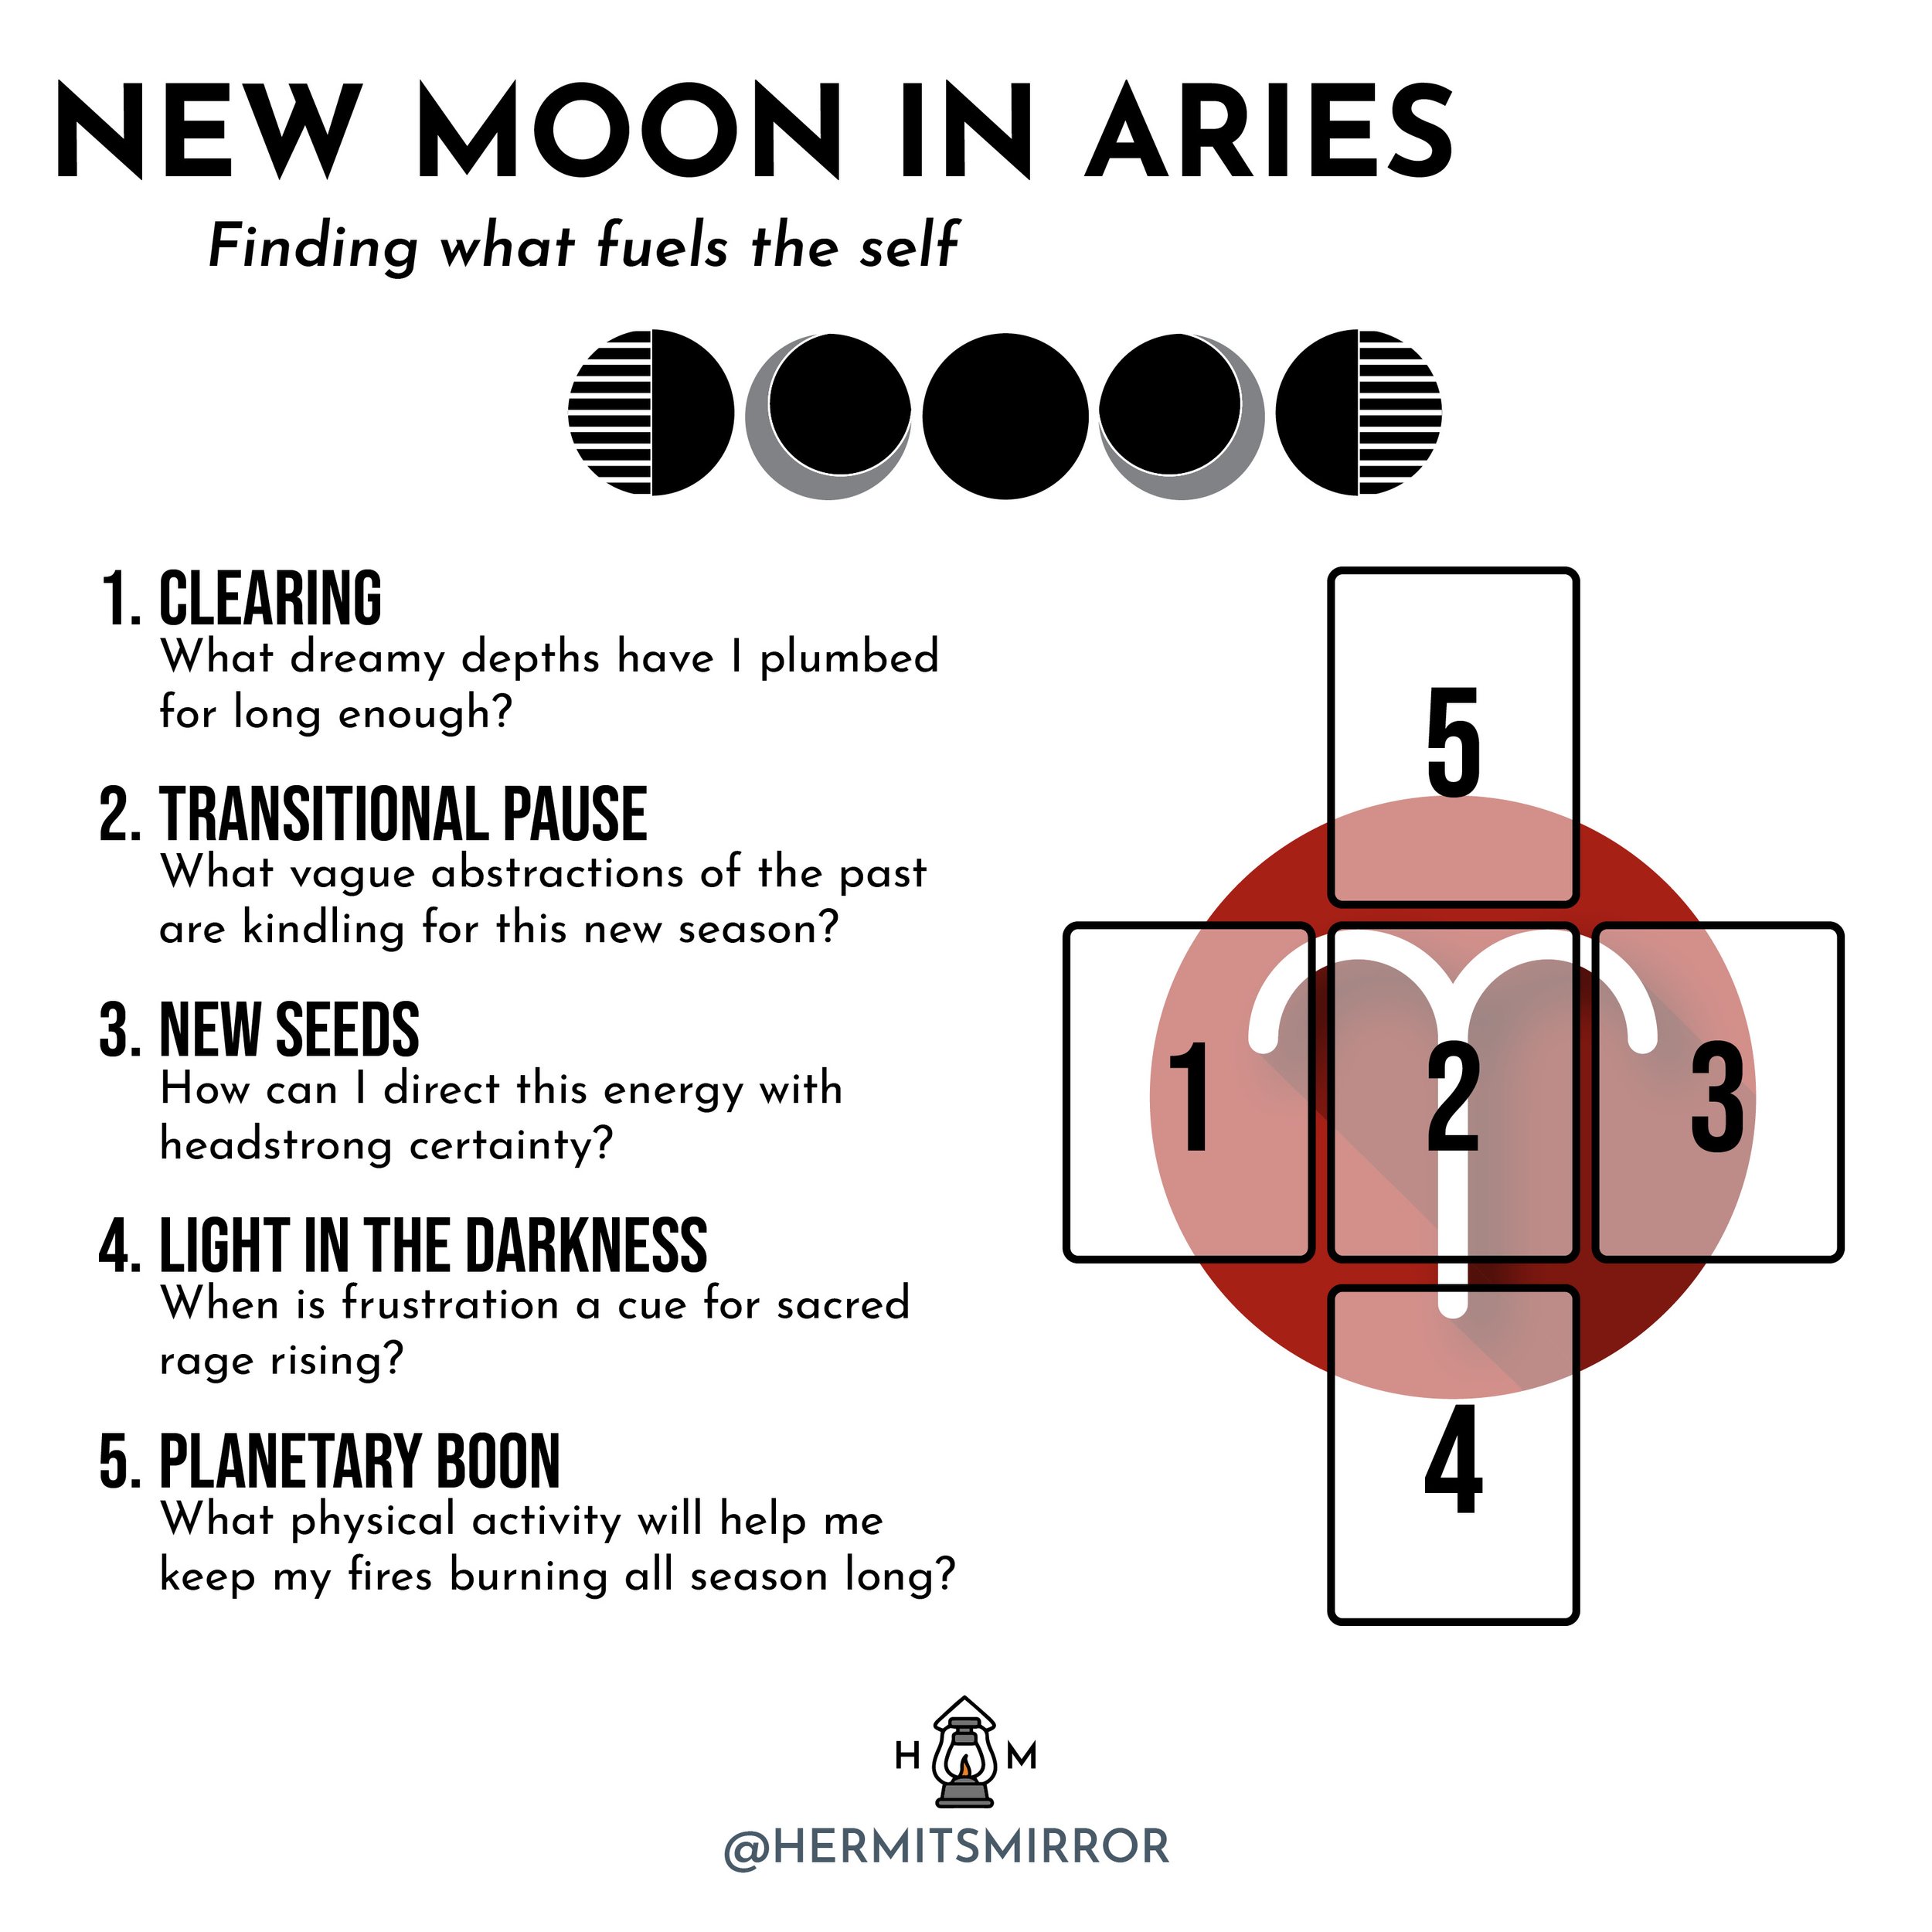 What's The Difference Between Full Moon And New Moon Energy?